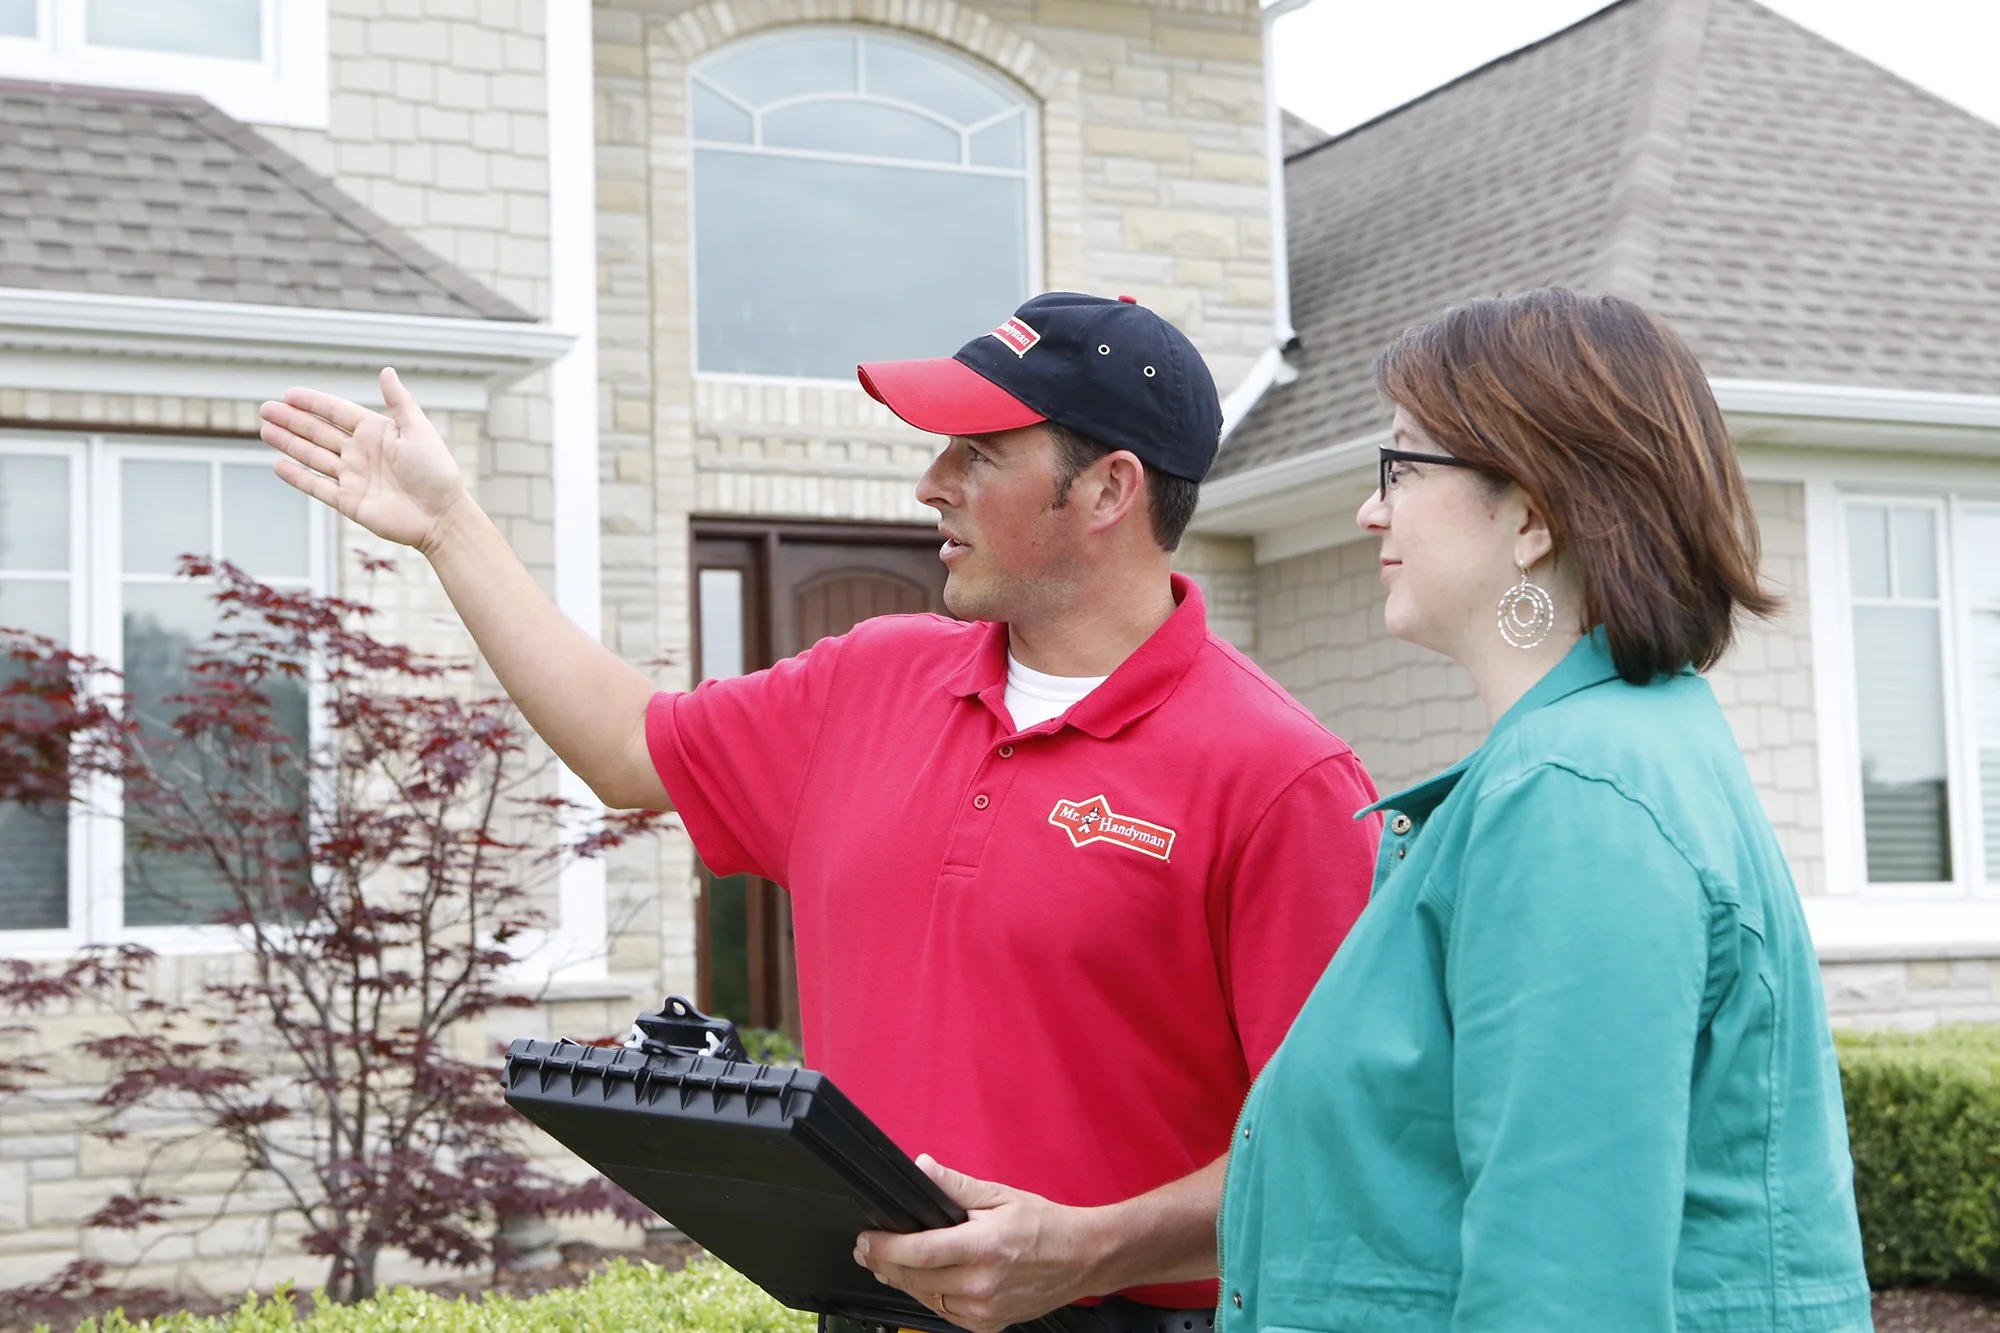  A handyman from Mr. Handyman standing outside of a home with a homeowner while they discuss Bixby handyman services for the exterior of the home.